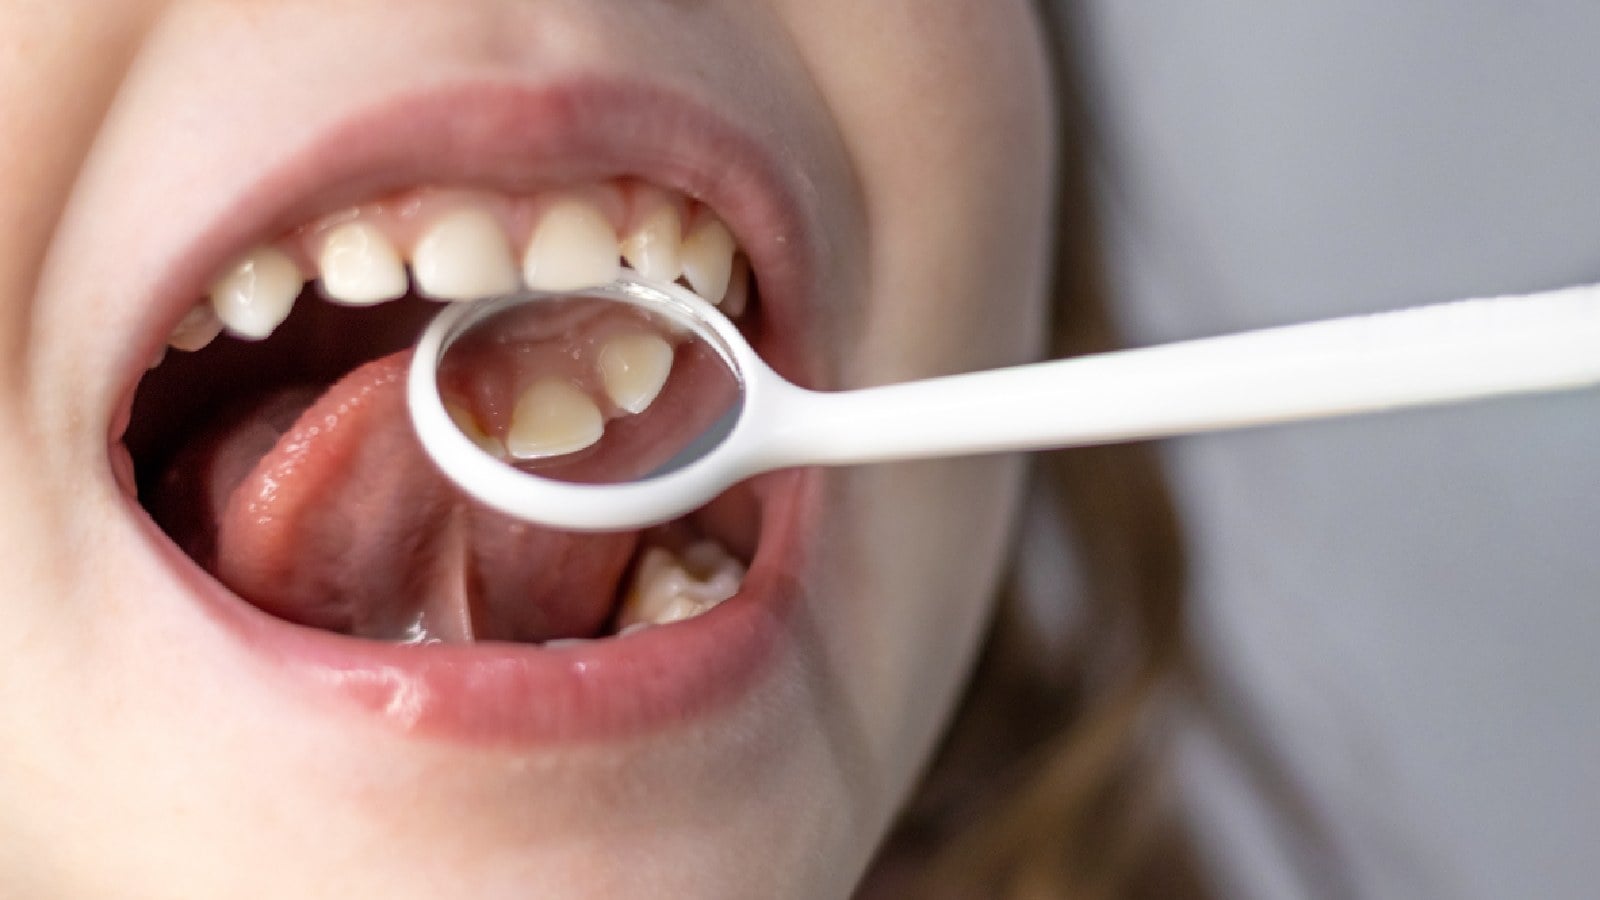 Know the early signs of tooth decay in children